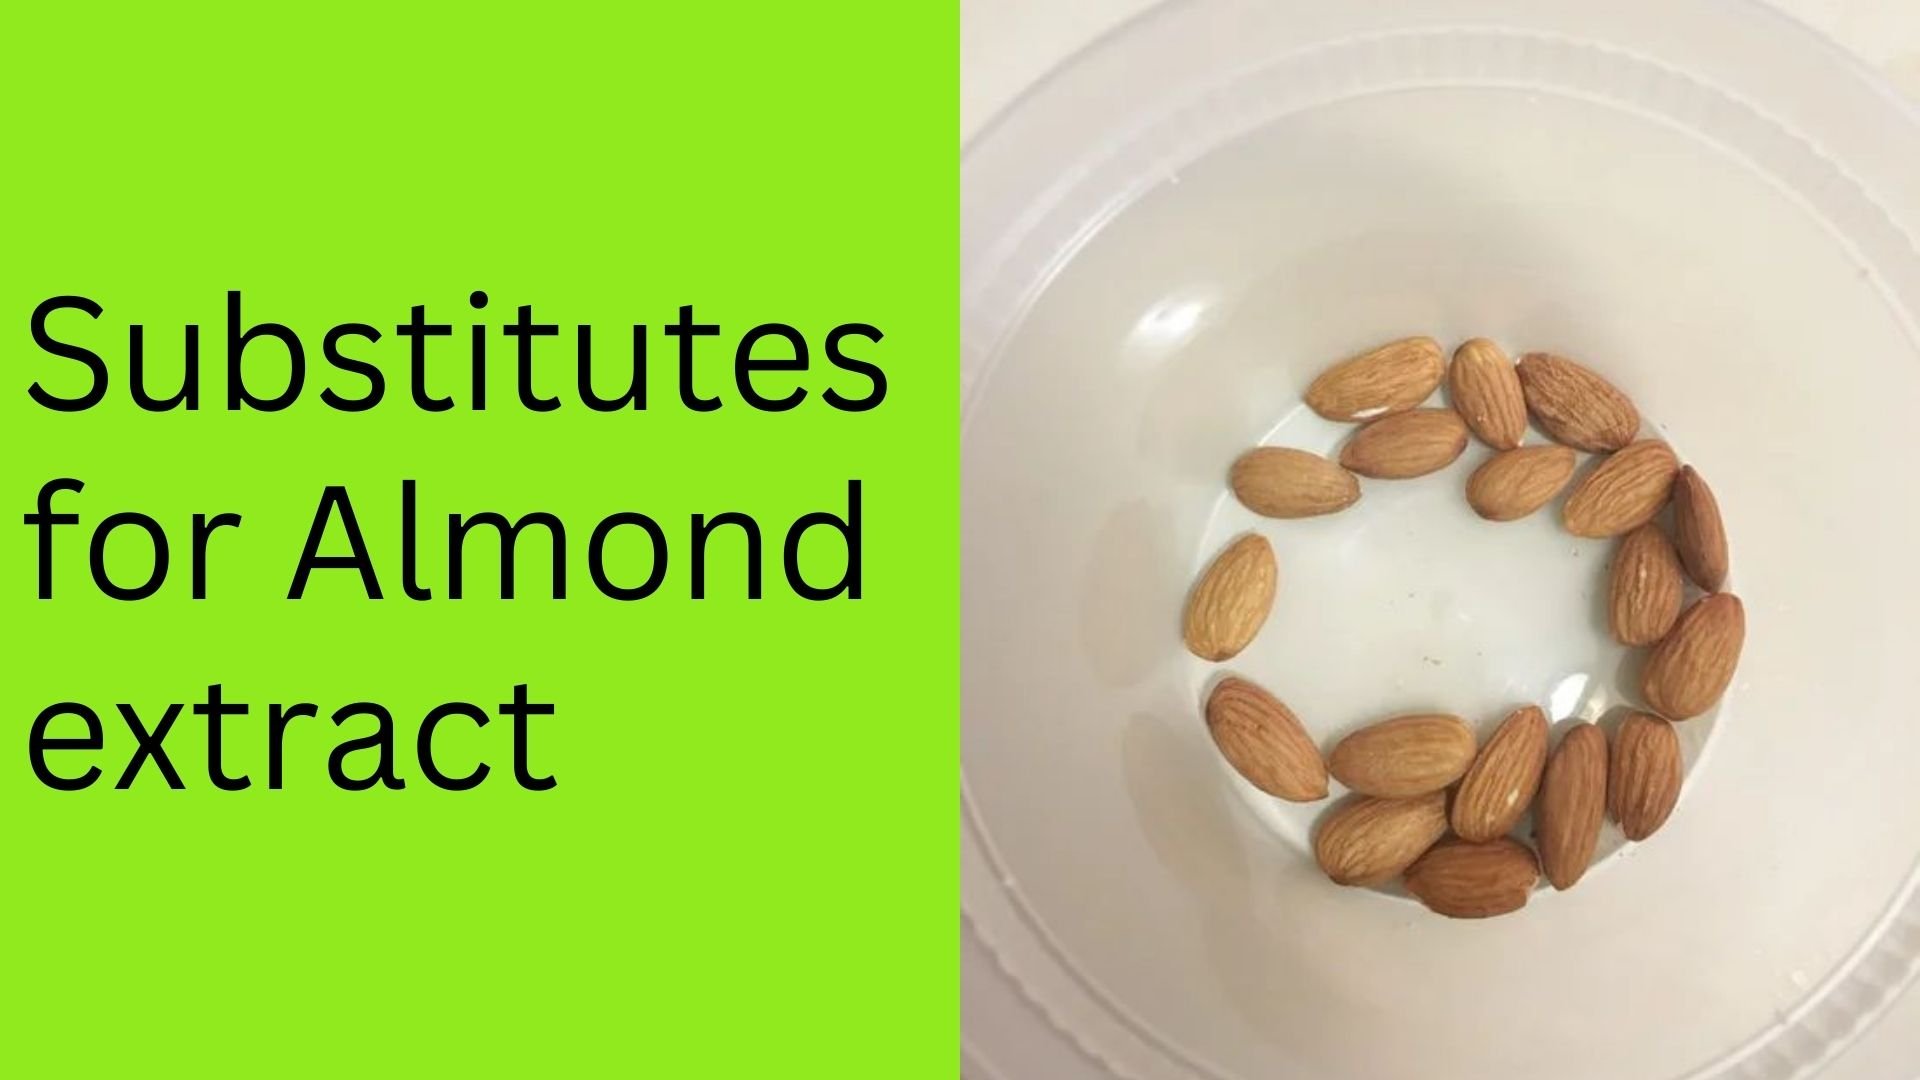 Substitutes for Almond extract